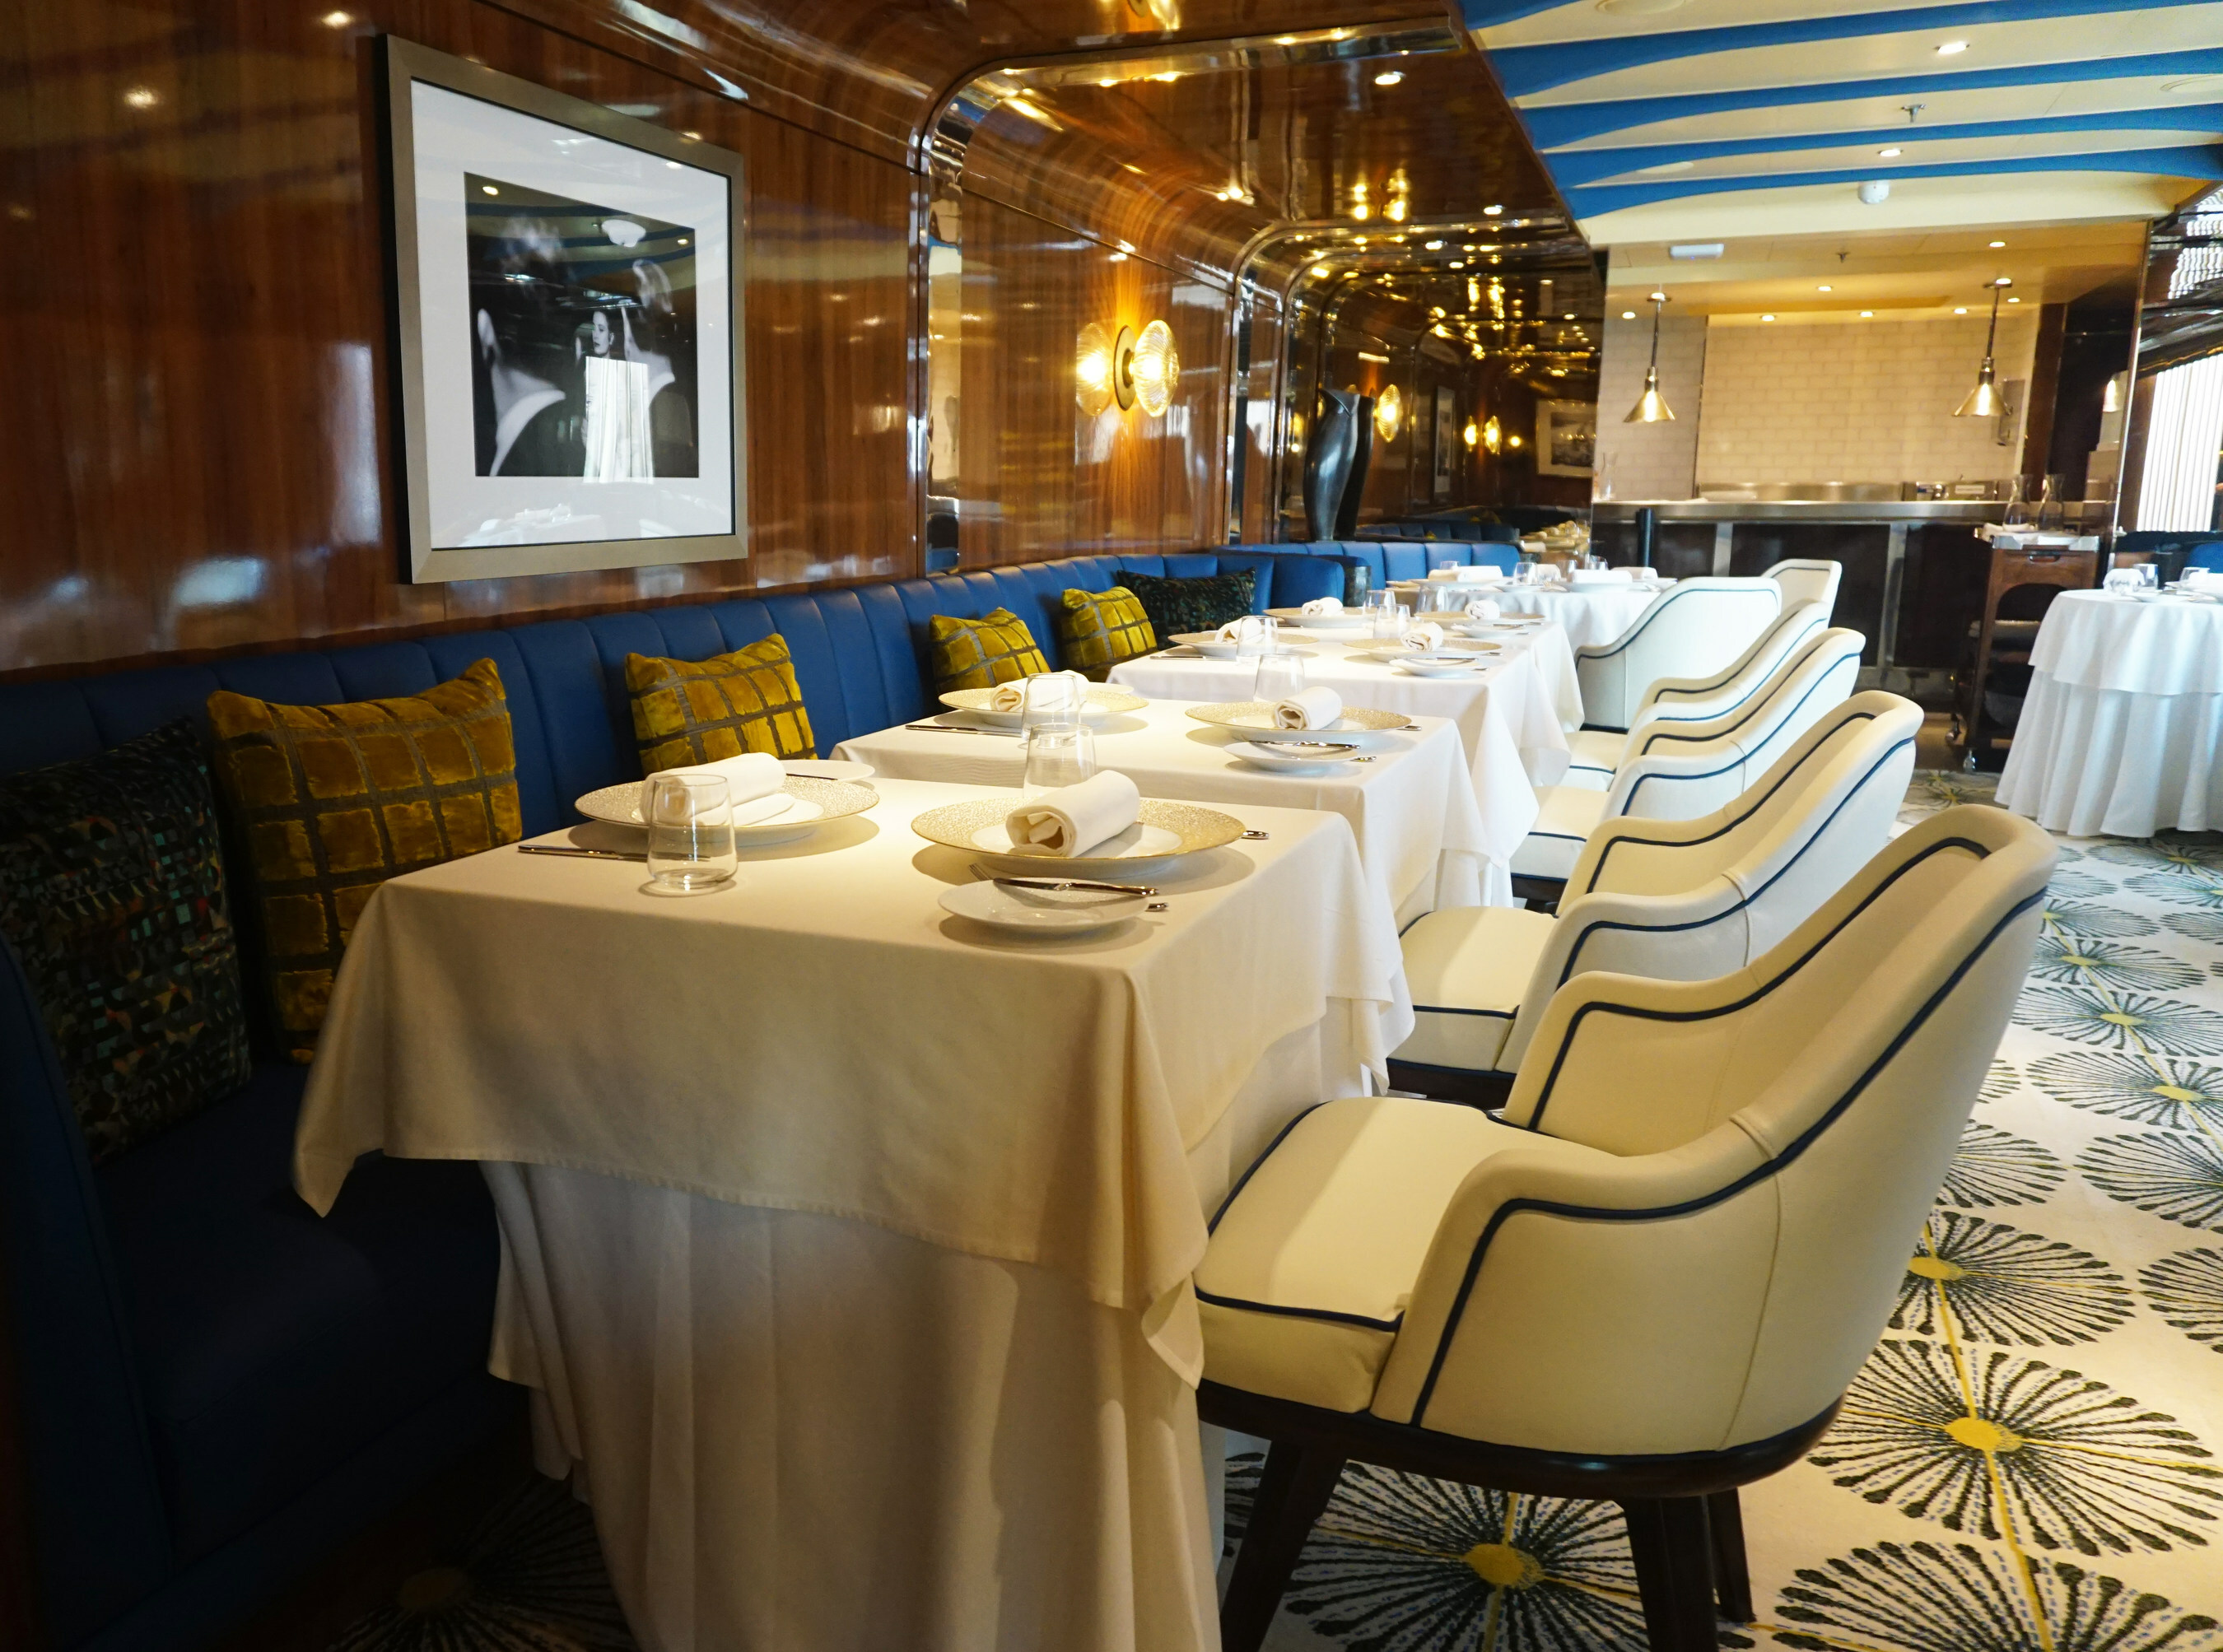 Solis is Seabourn’s new fine dining restaurant celebrating Mediterranean cuisine inspired by the places visited by the line’s ultra-luxury ships. Seabourn opened the first Solis on Seabourn Quest on January 20, 2024  (Image at LateCruiseNews.com - January 2024)